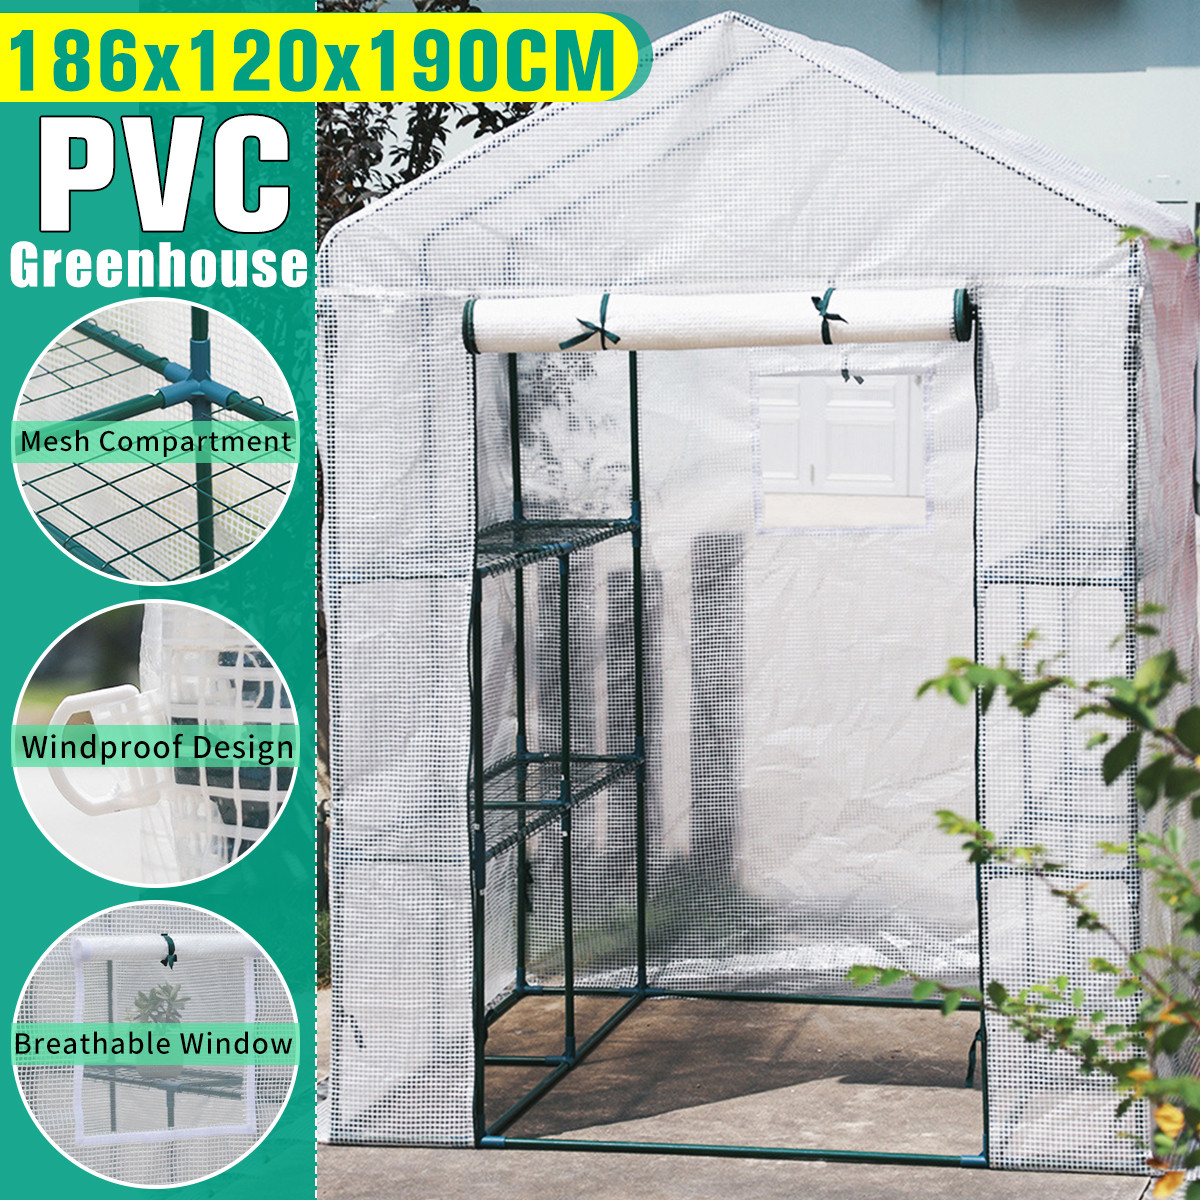 Greenhouse-Walk-In-PVC-With-Shelf-Cover-Outdoor-Tent-House-Plants-186x120x190CM-1771816-1